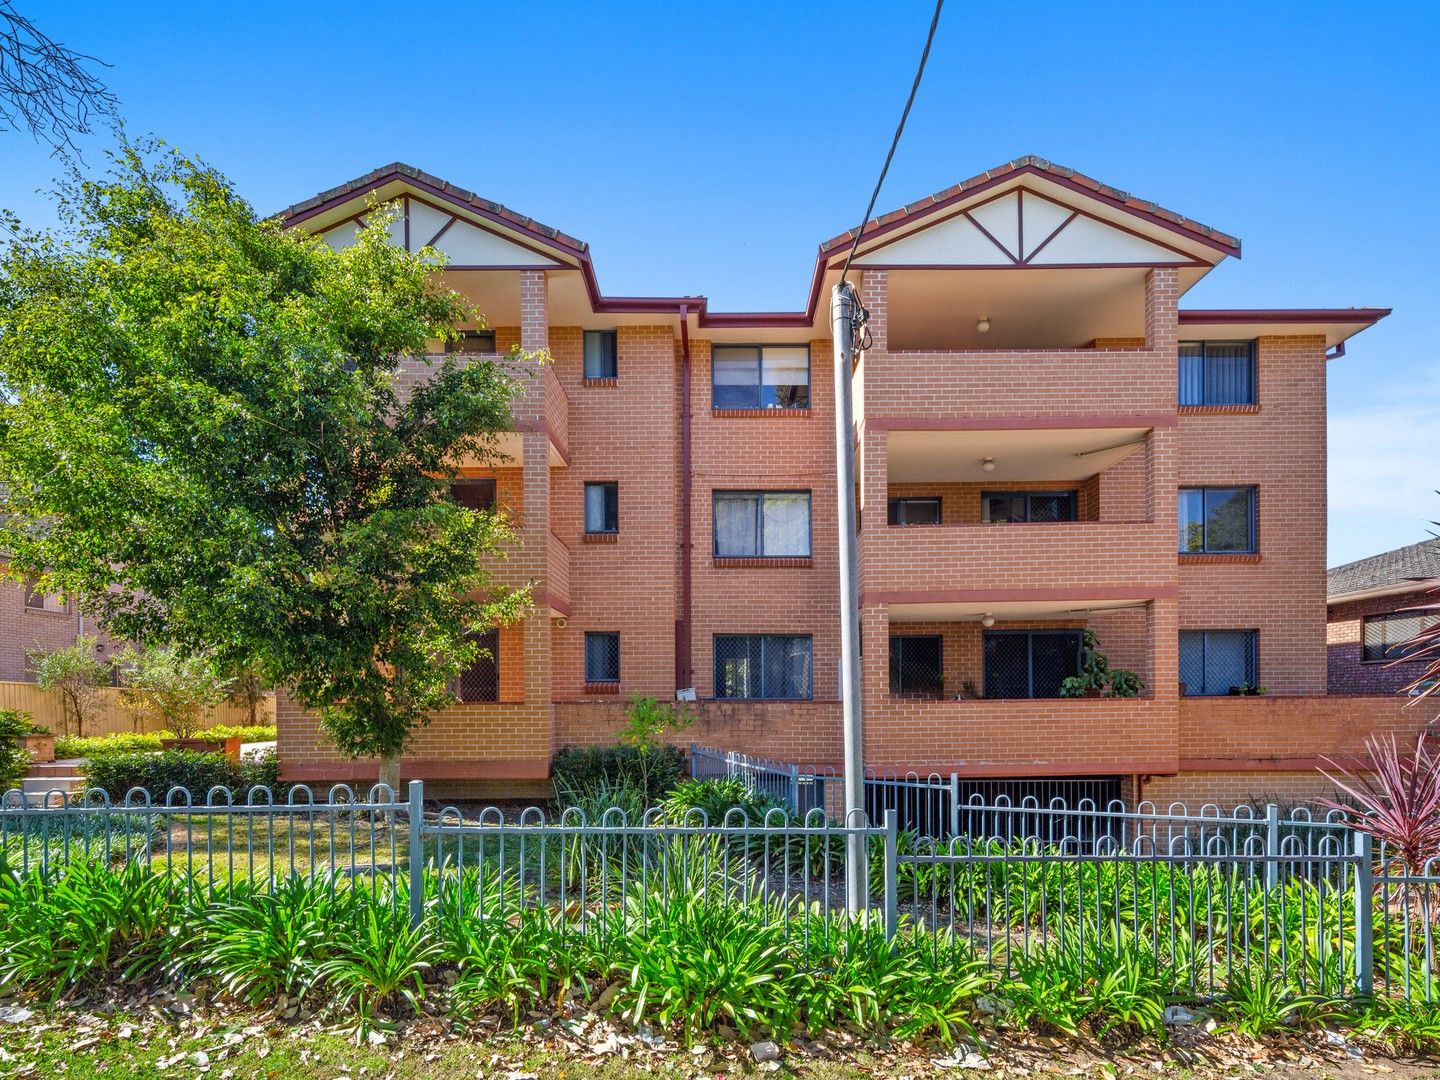 11/47-49 Cairds Avenue, Bankstown NSW 2200, Image 0